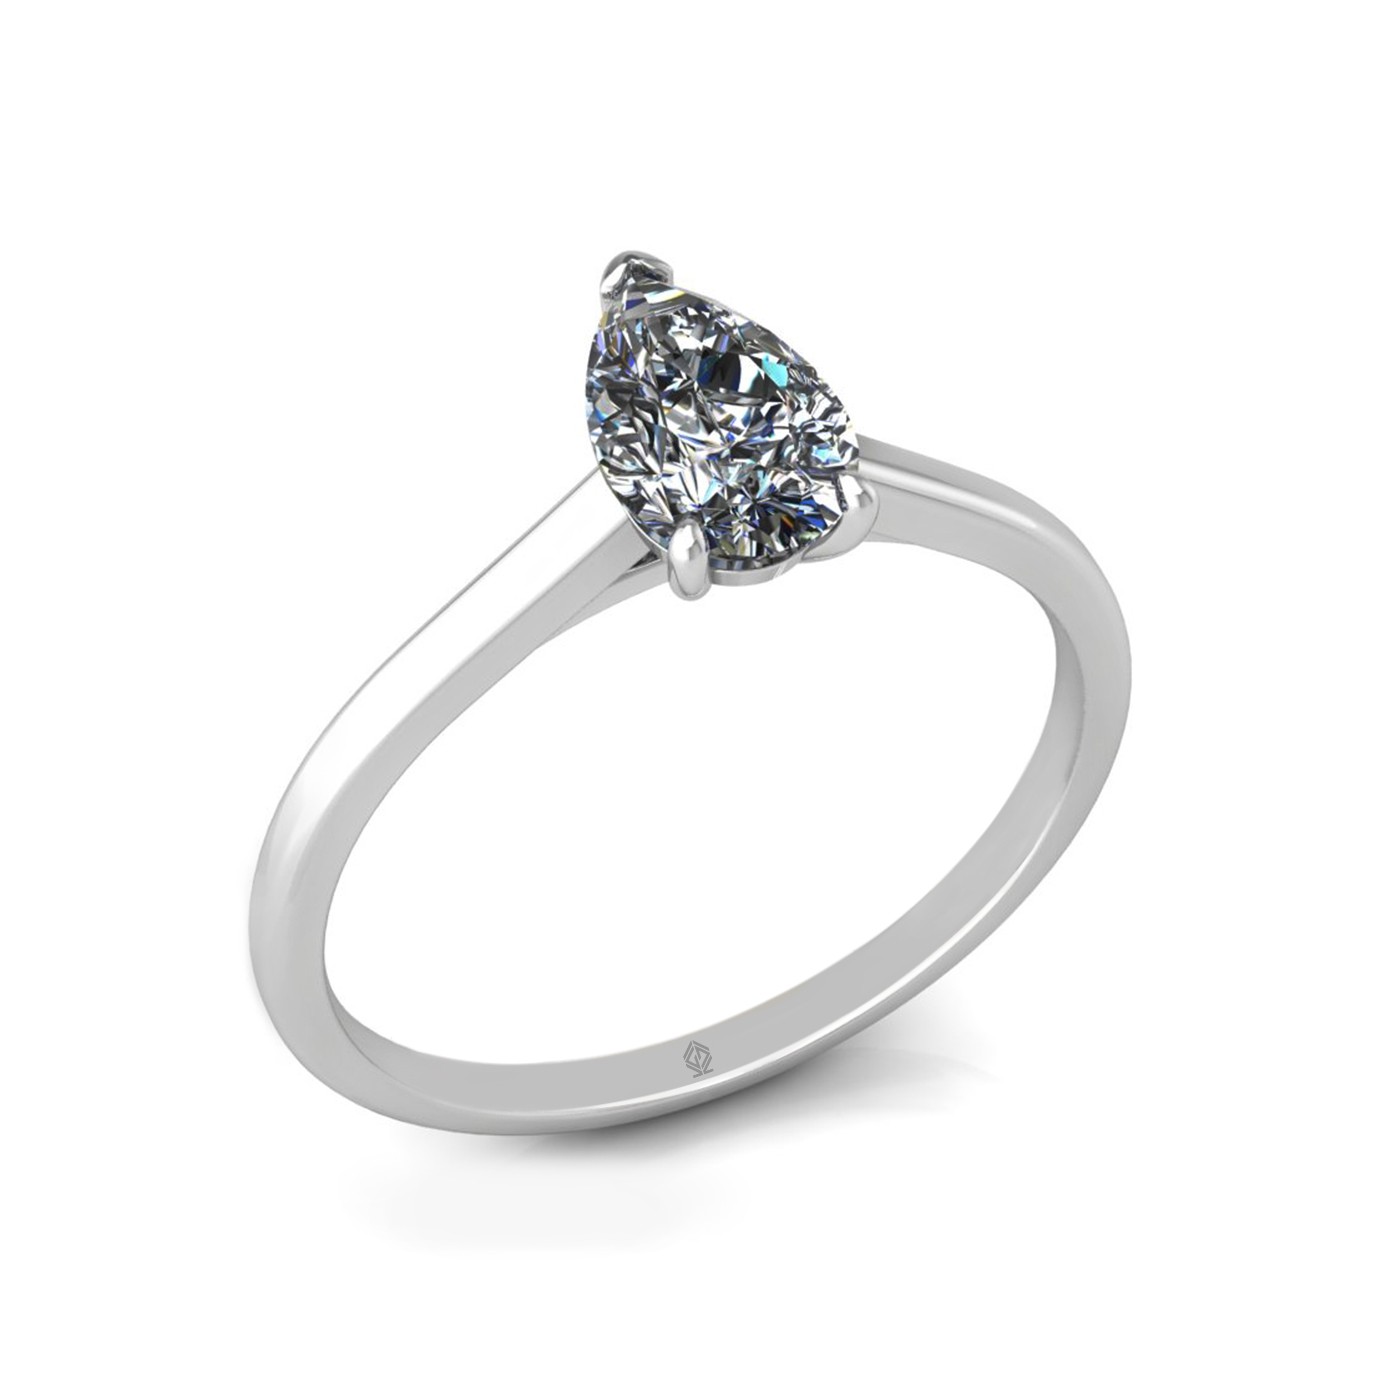 18k white gold  0,80 ct 3 prongs solitaire pear cut diamond engagement ring with whisper thin band